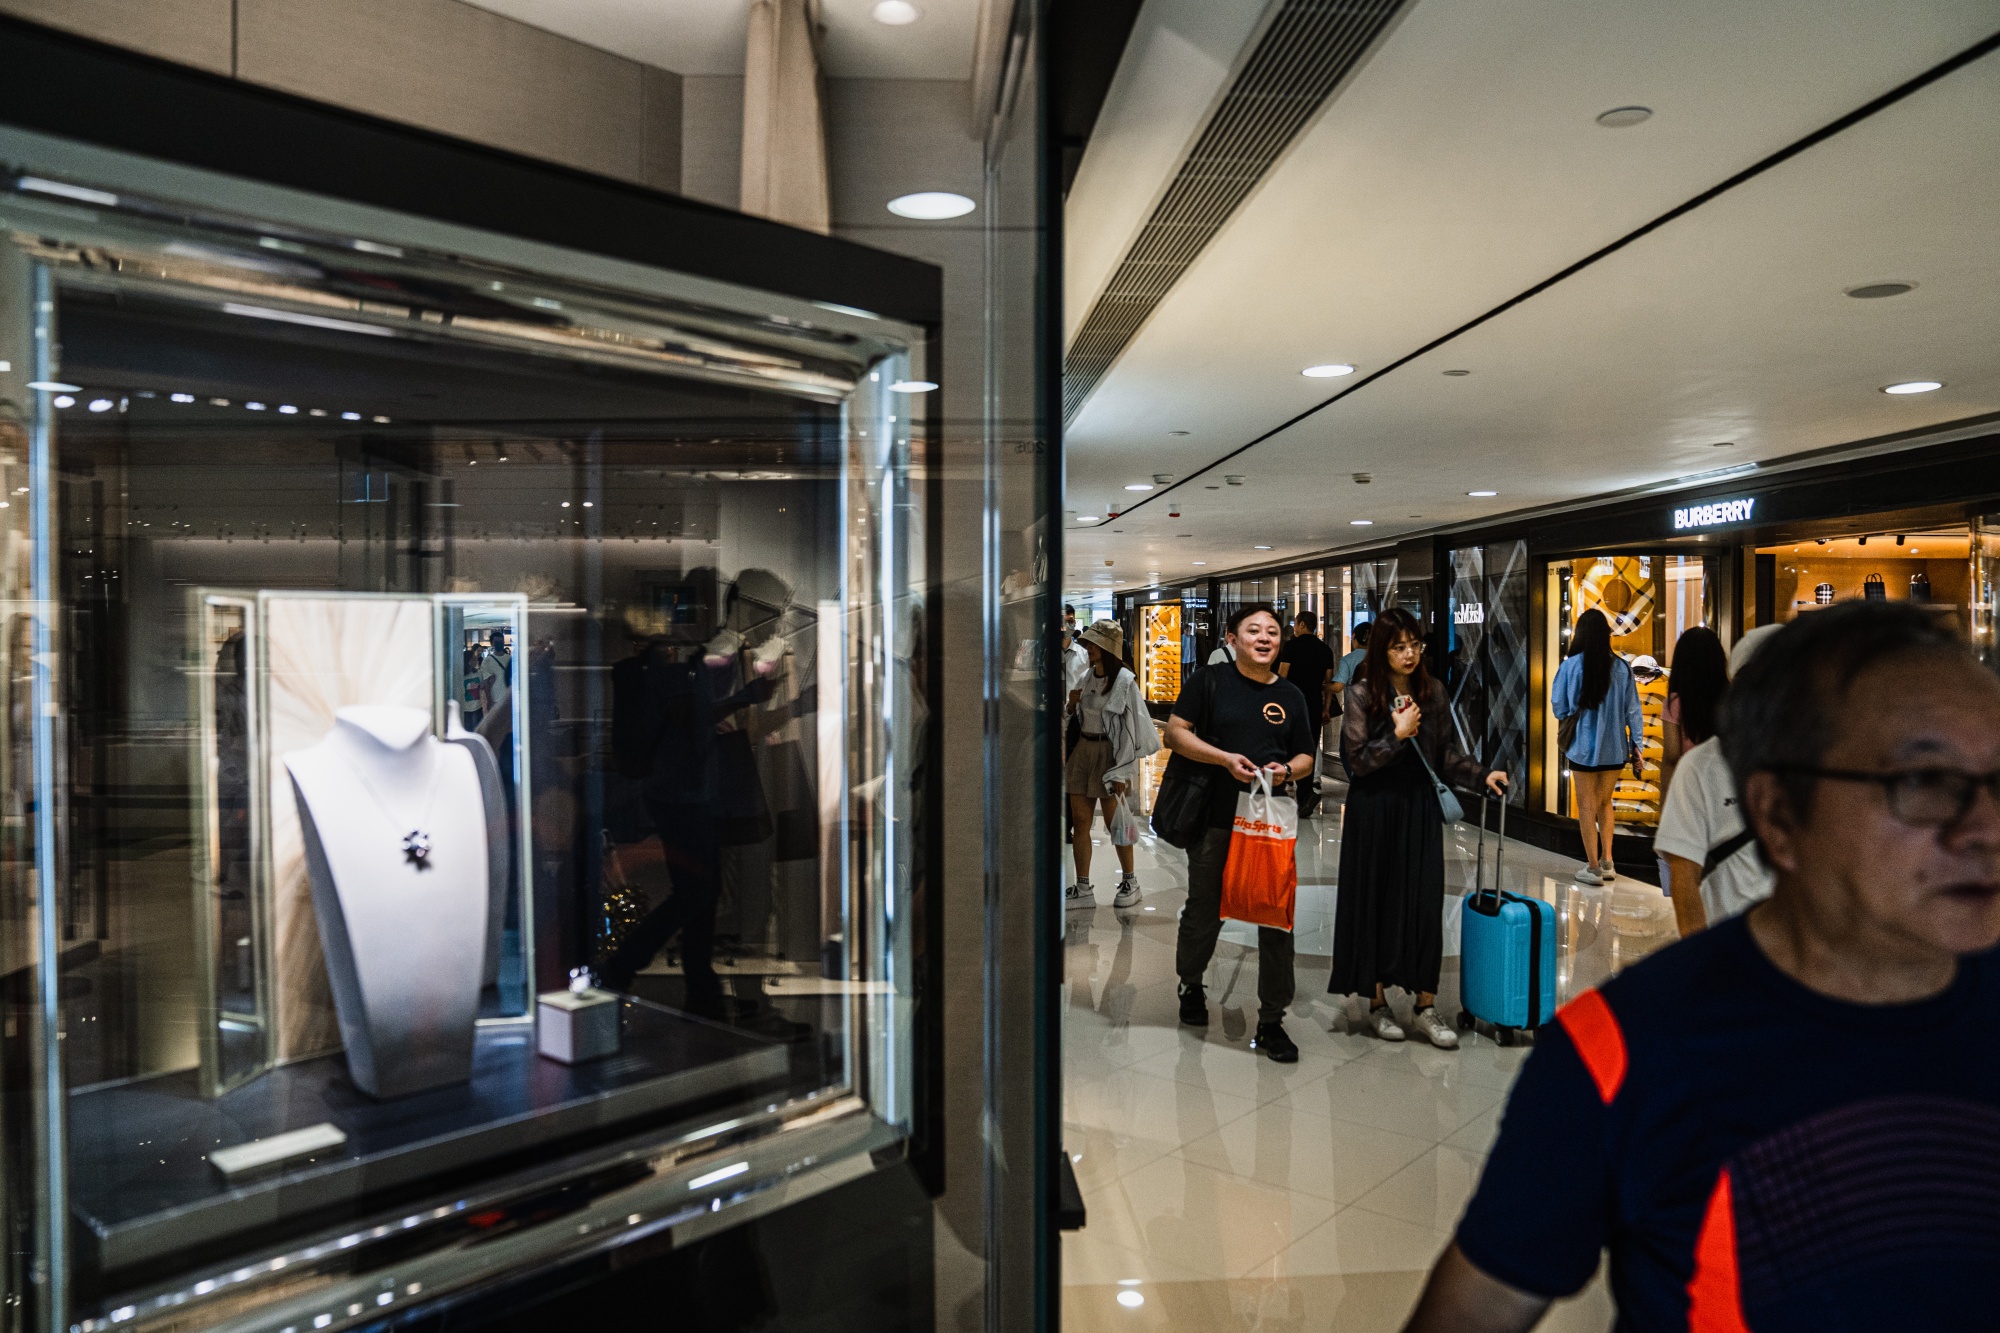 Wharf's Harbour City Amps Up Luxury Appeal to Compete for Shoppers in Hong  Kong - Bloomberg